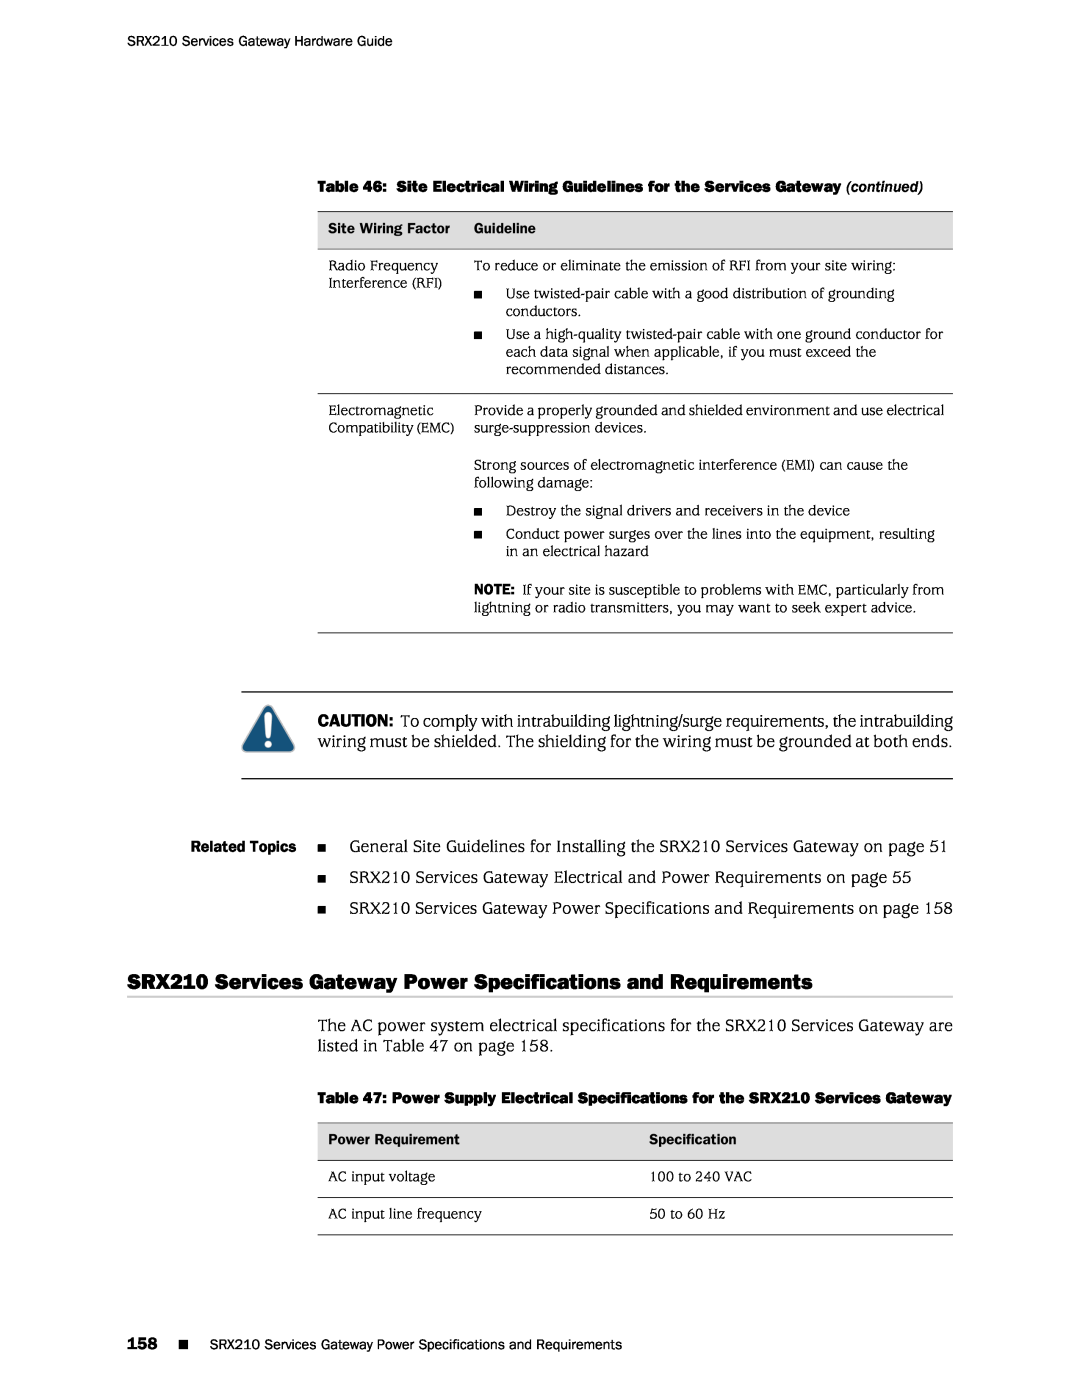 Juniper Networks SRX 210 manual SRX210 Services Gateway Power Specifications and Requirements 